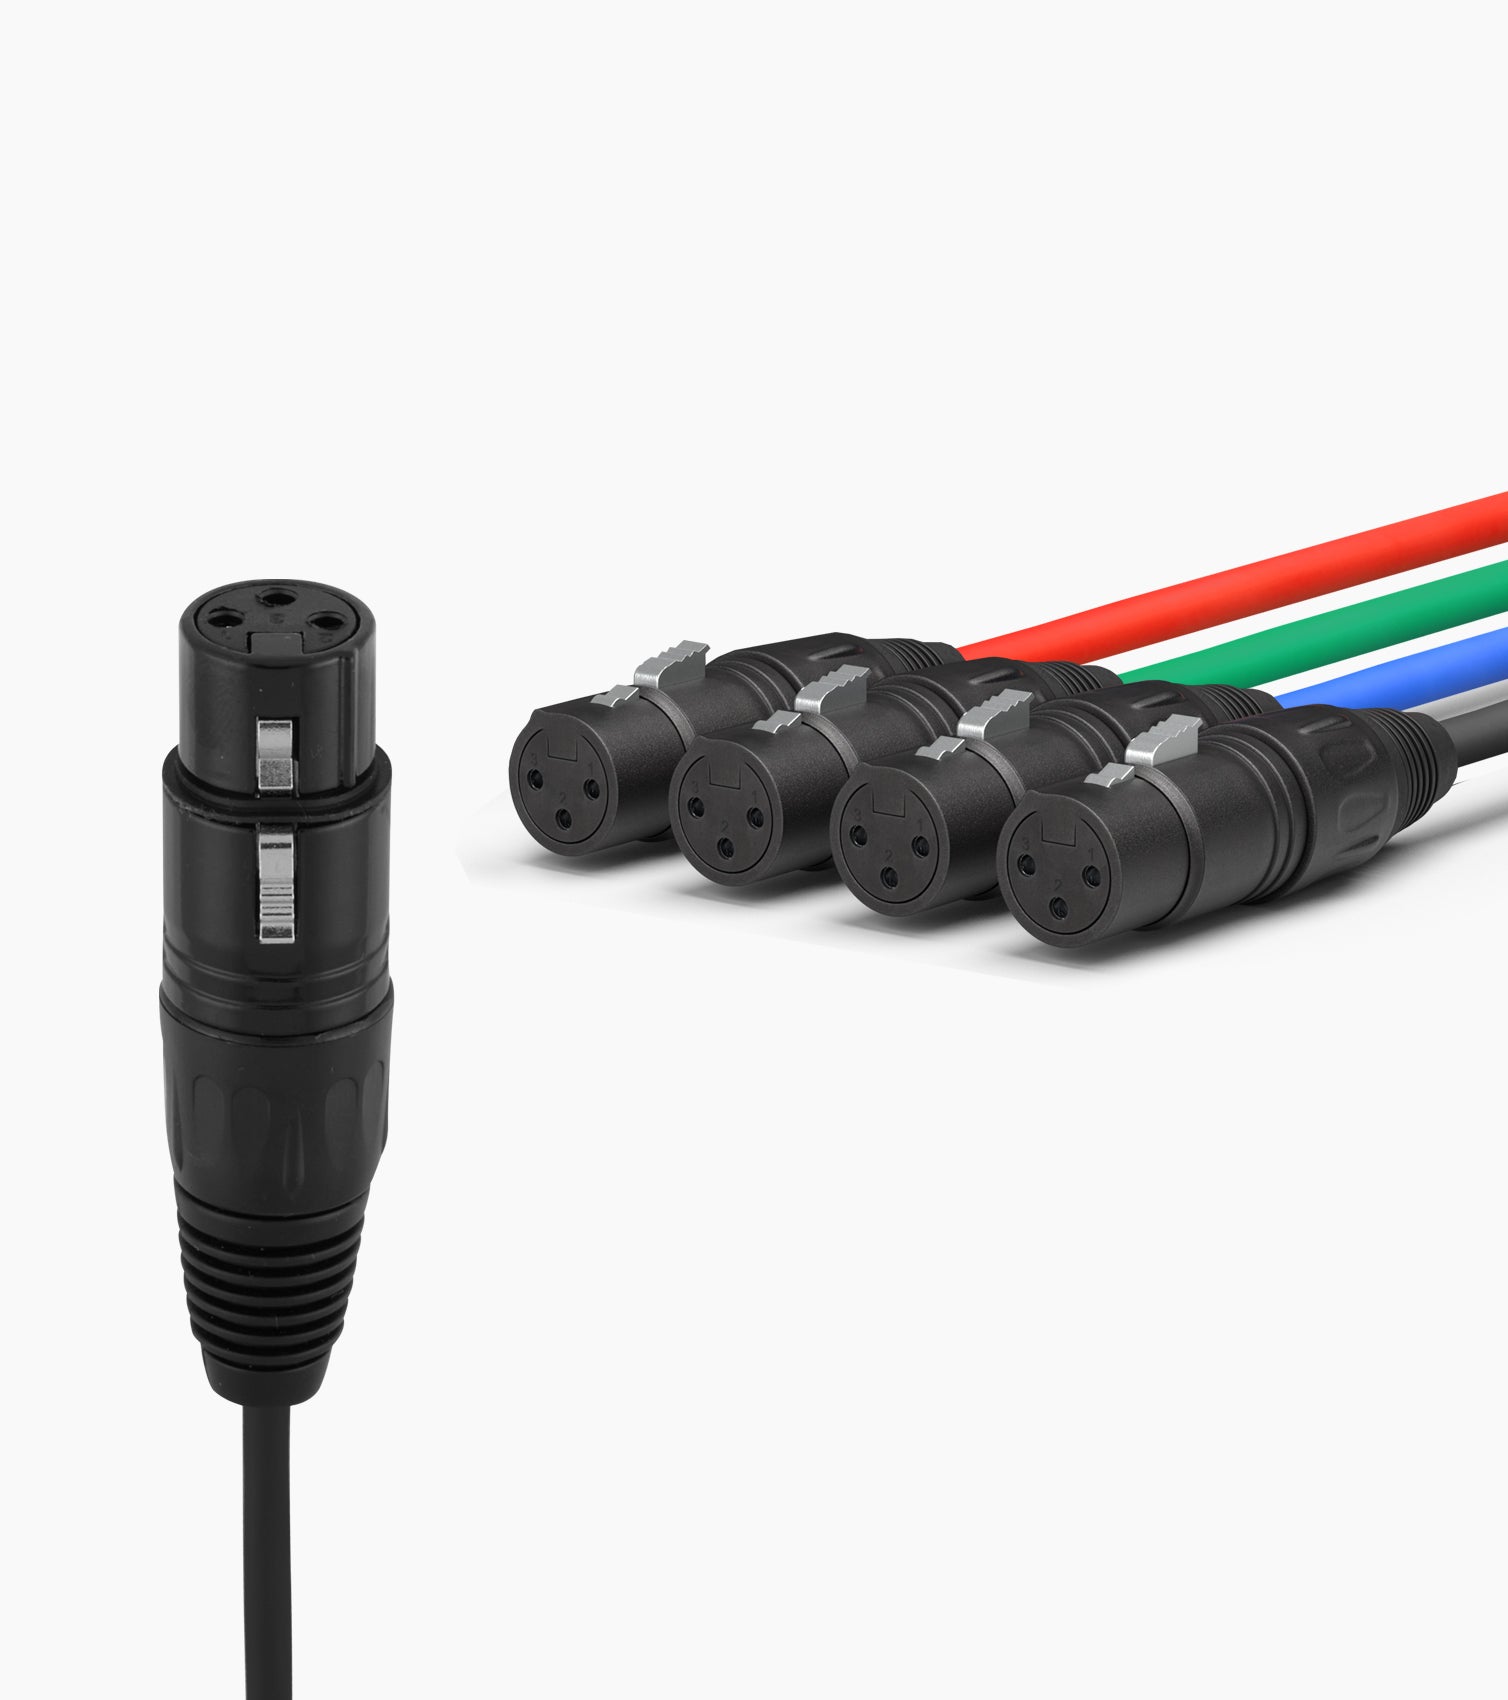 LyxPro 4-Channel Female XLR to Cat6 Network Cable - Connectors